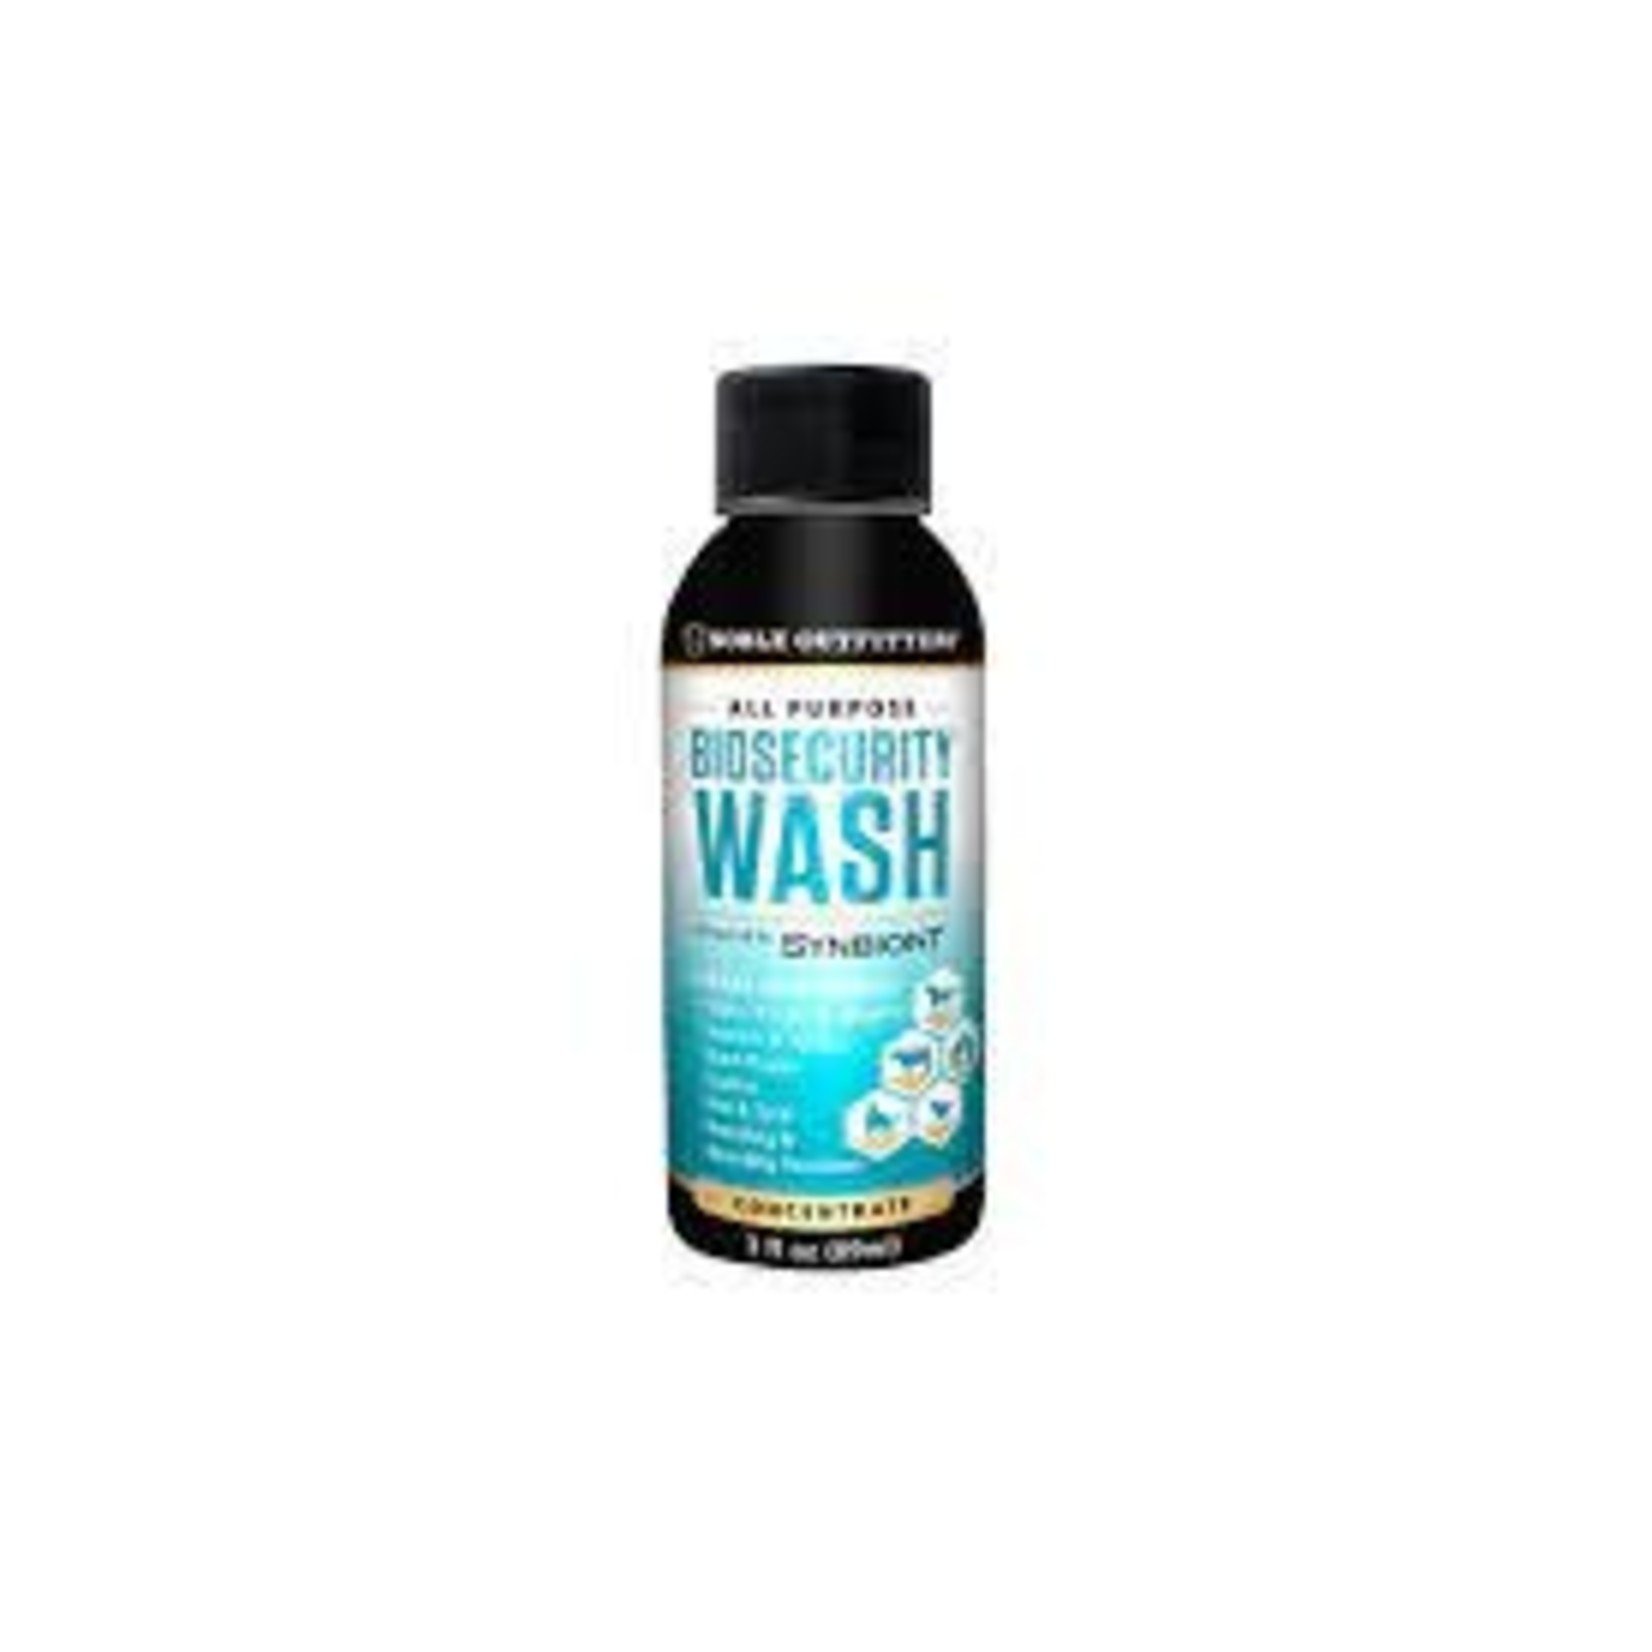 Noble Outfitters All Purpose Bio Security Wash 3oz